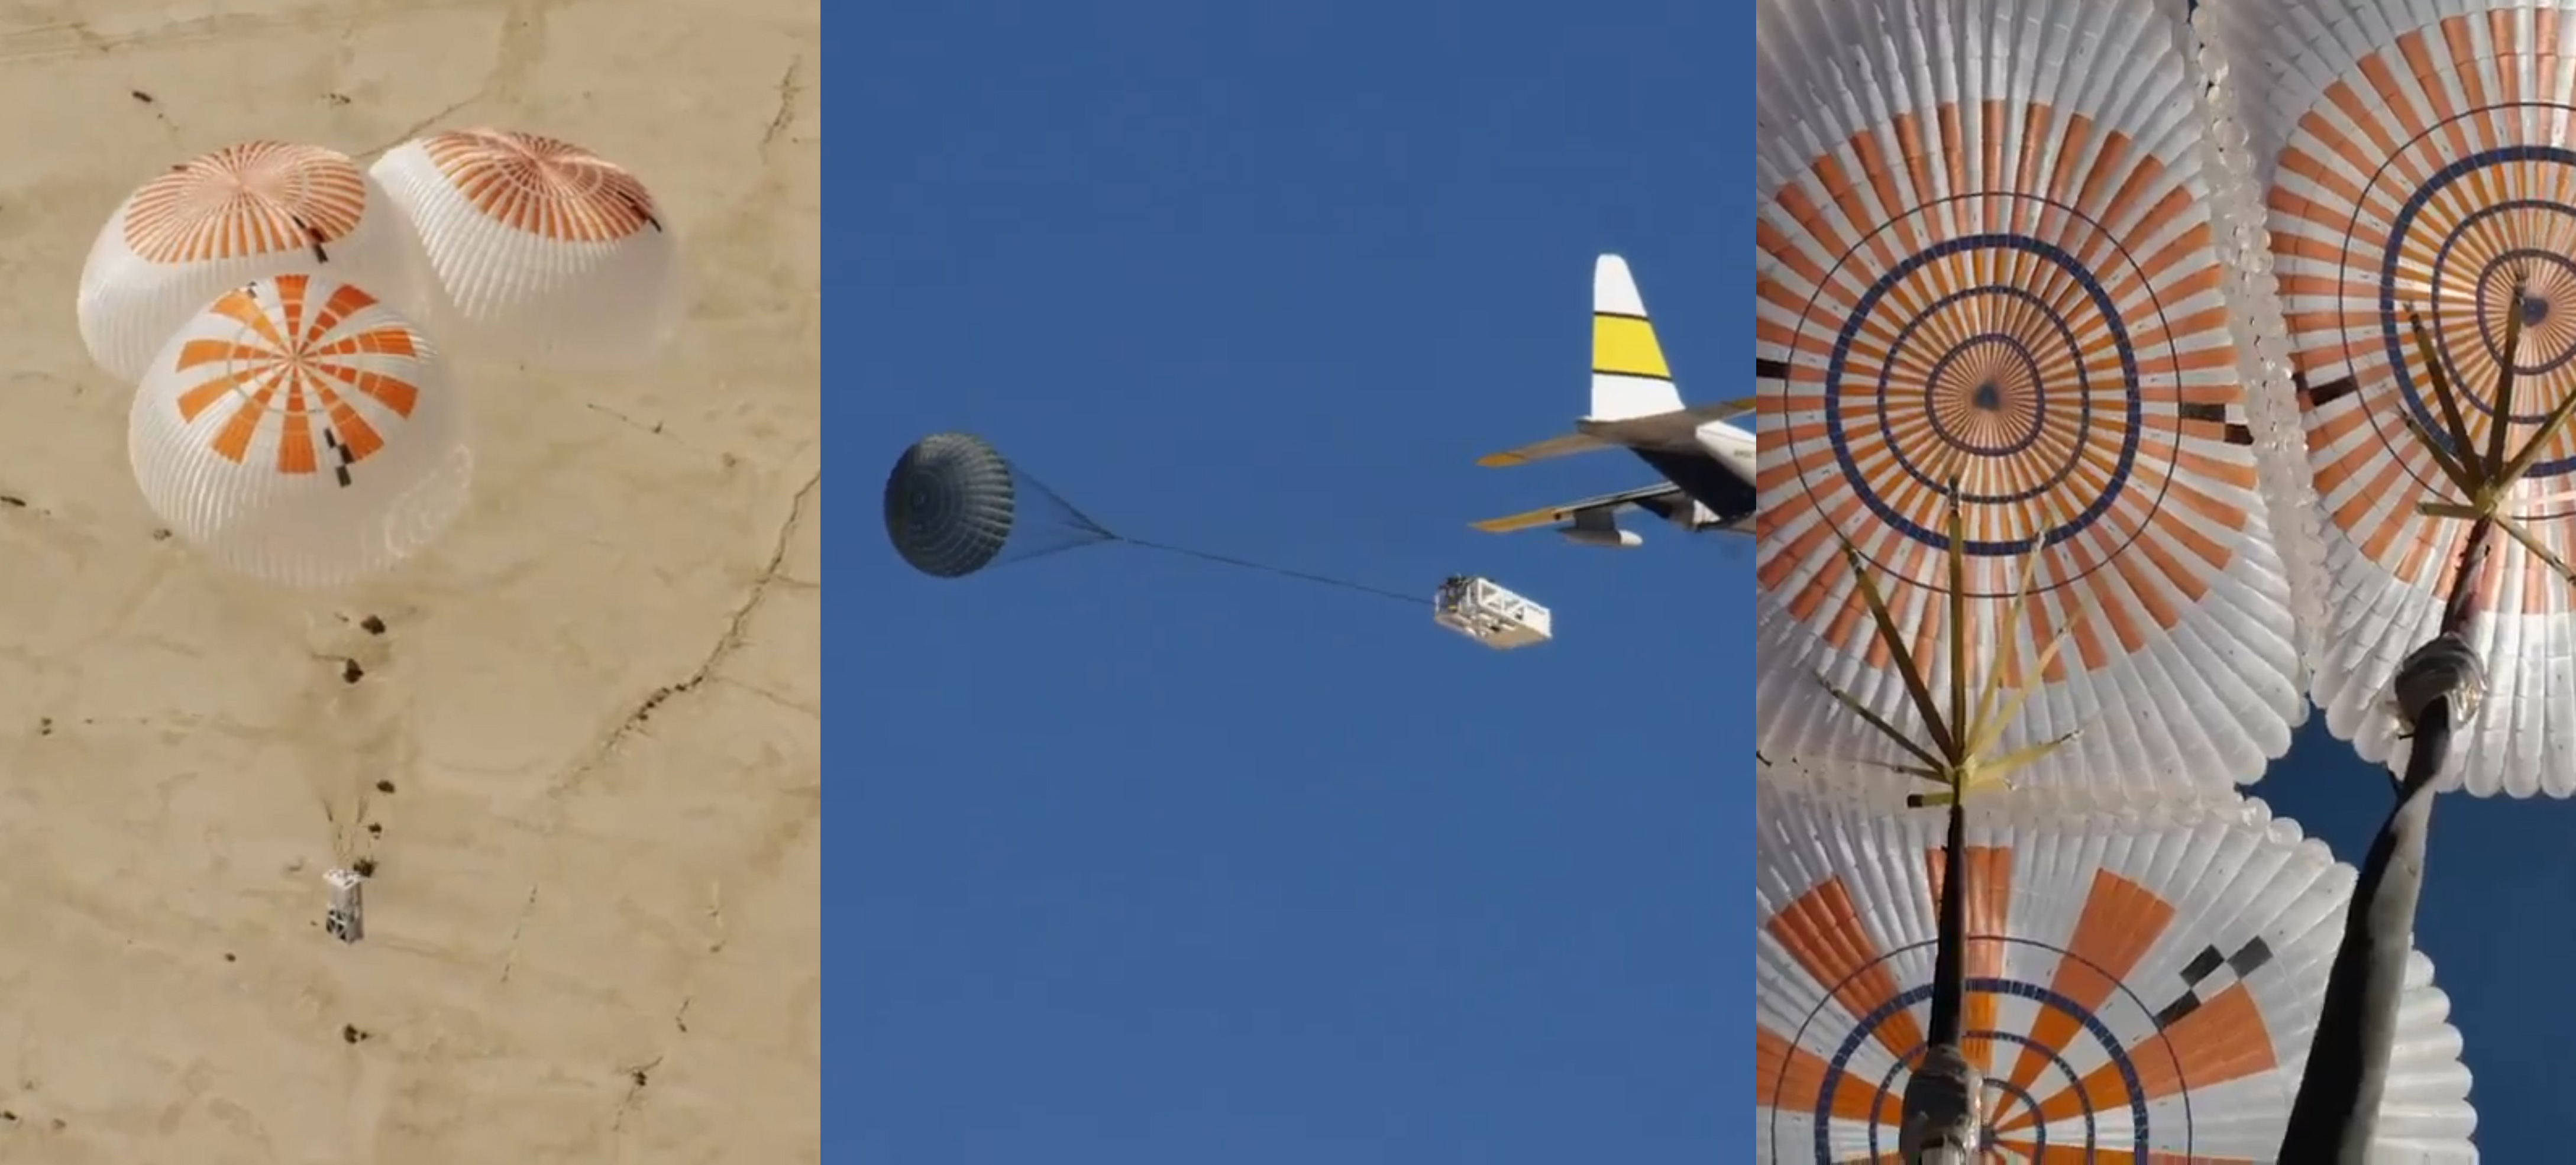 Crew Dragon Mk3 parachute testing Oct 2019 (SpaceX) feature 2